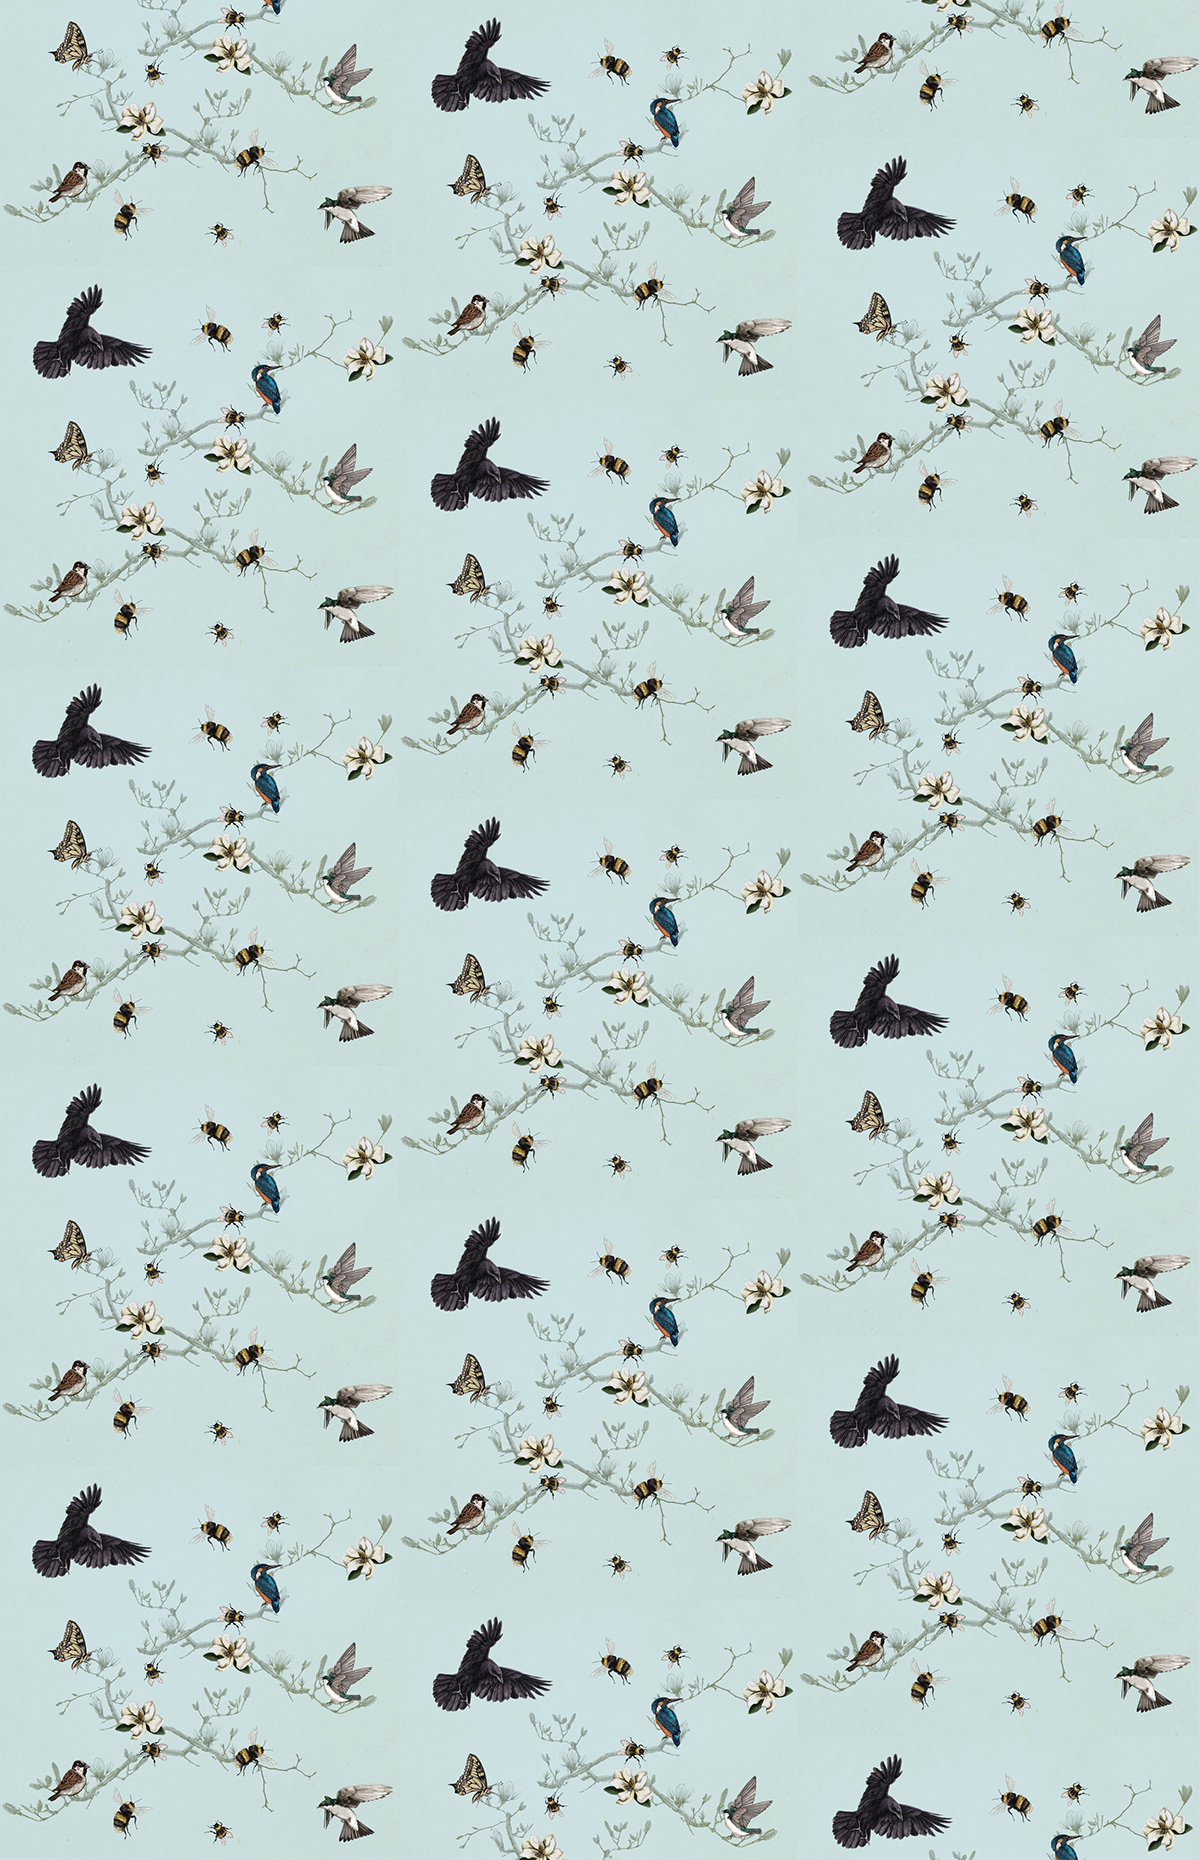 repeating patterns  surface design  drawing  textile design bee Bumblebee handdrawn birds seagull toile de jouy